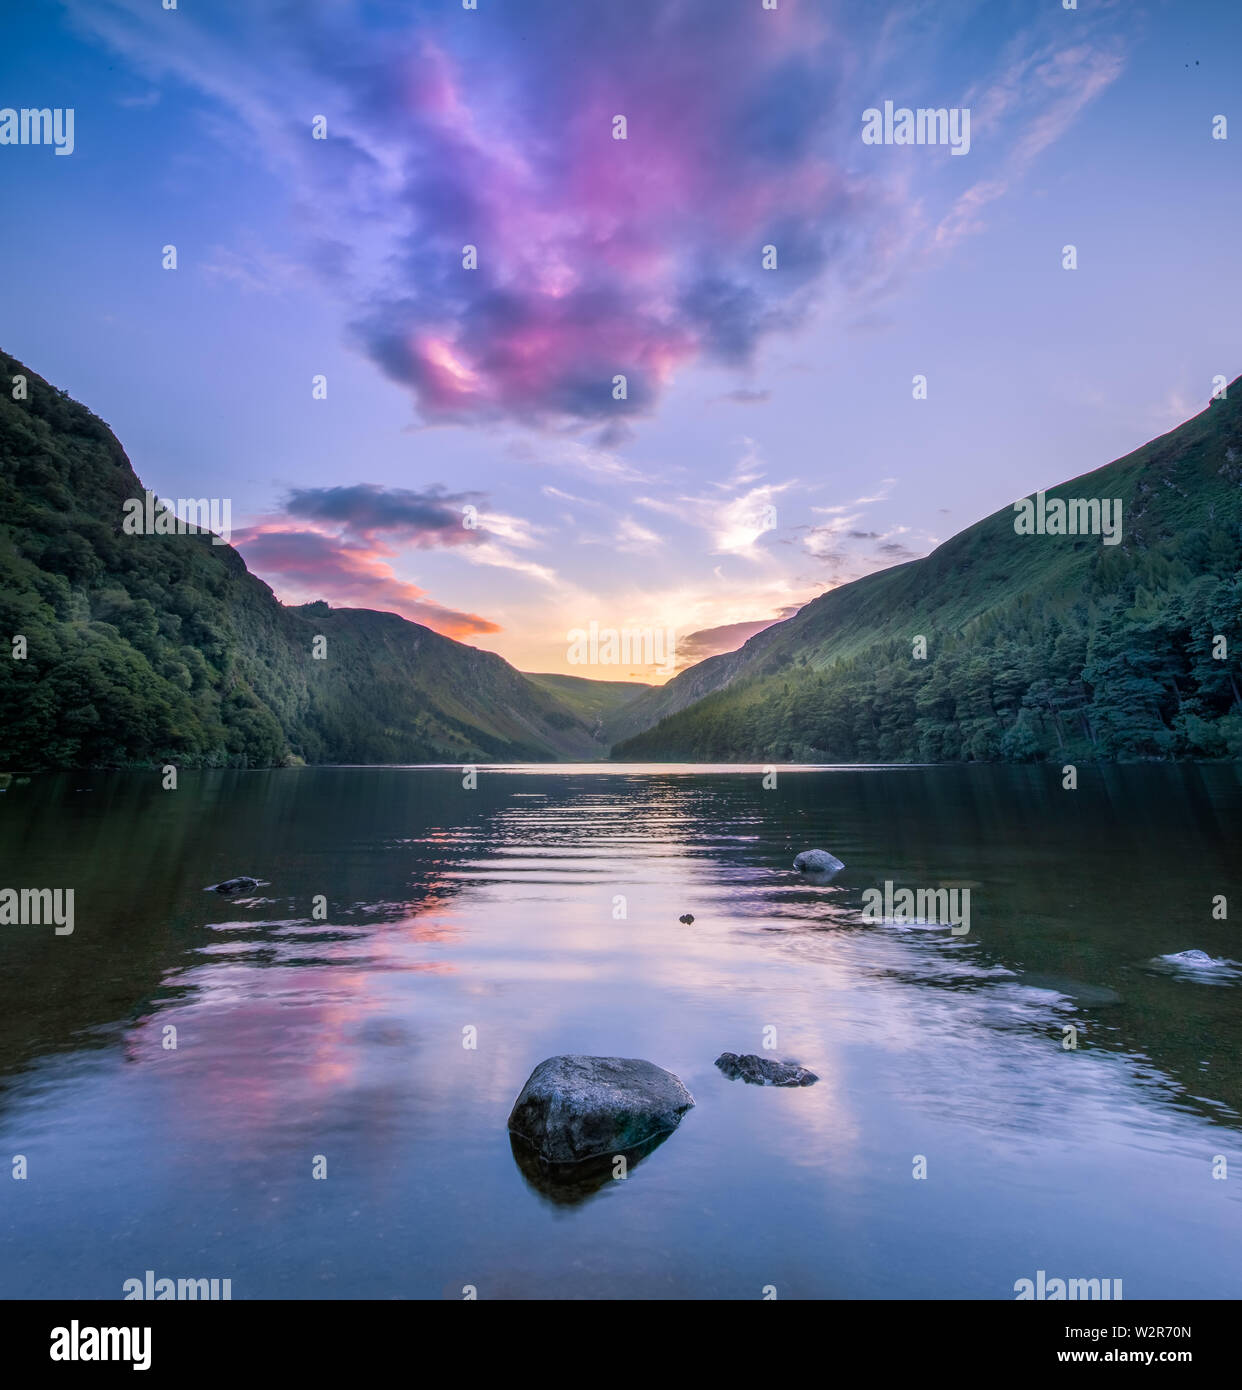 Glendalough, co. Wicklow / Ireland - Beautiful reflection of sky in water of Upper Lake in Glendalough Valley at dusk Stock Photo